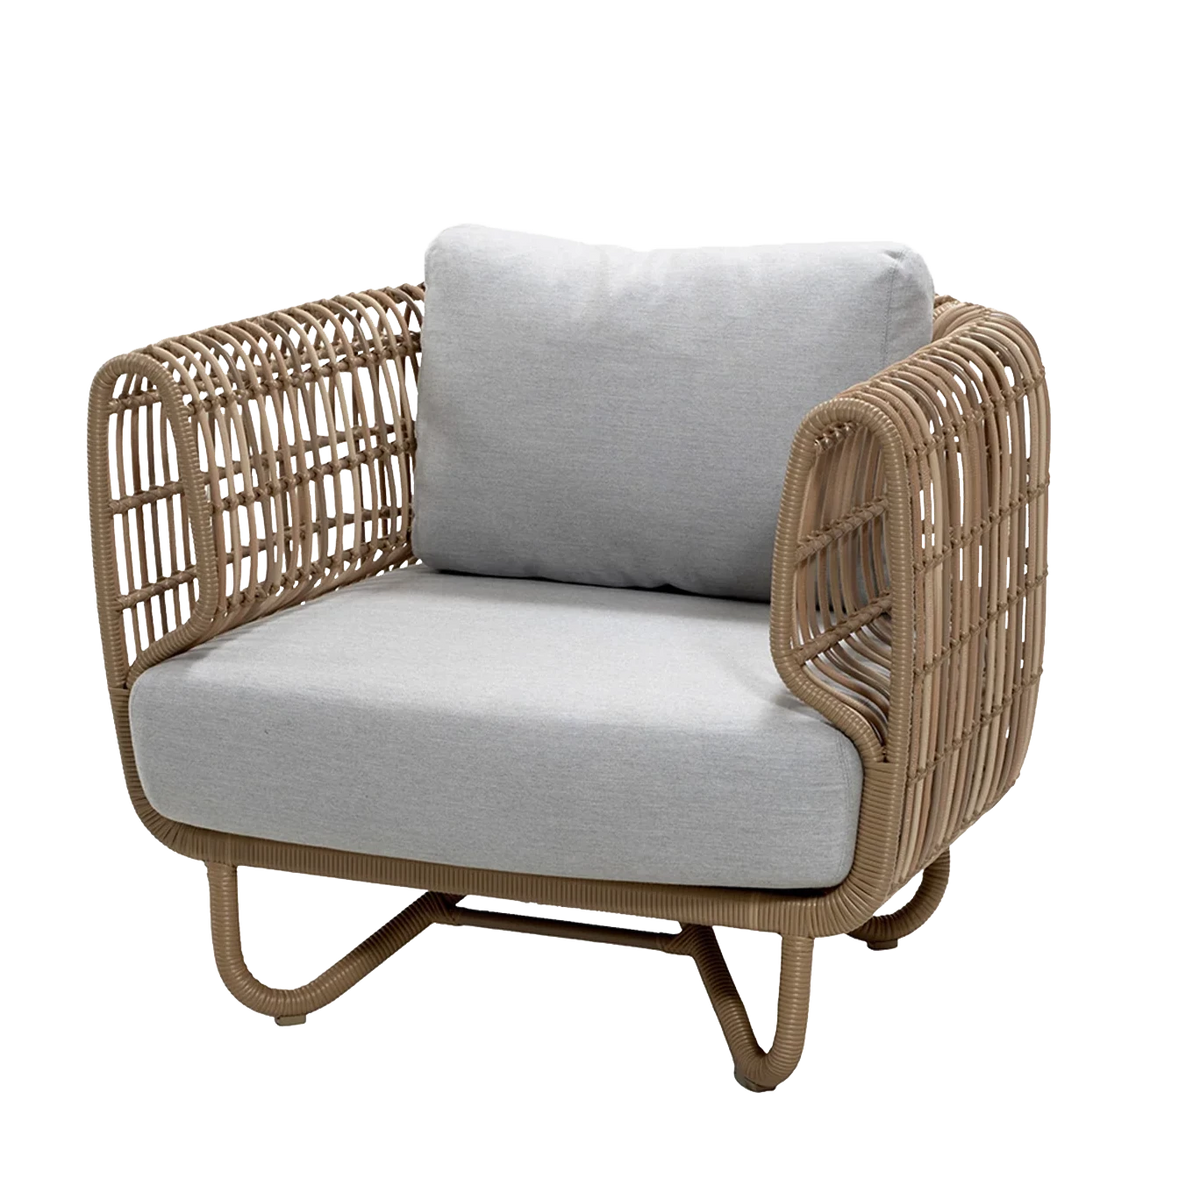 Nest Outdoor Lounge Chair and Cushion Eleish Van Breems Home